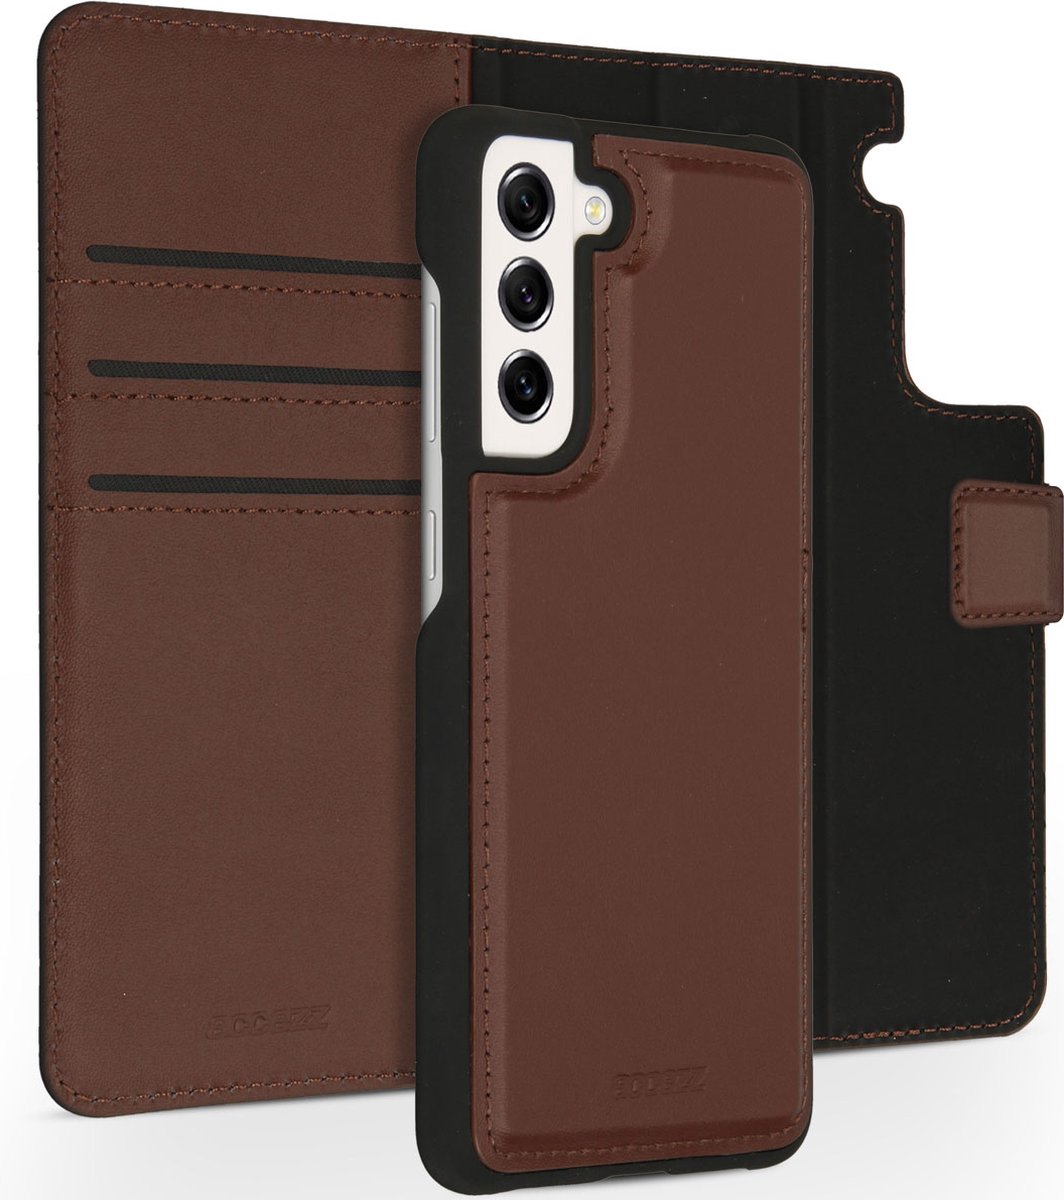 Accezz Premium Leather 2 in 1 Wallet Bookcase Samsung Galaxy S21 FE hoesje - Bruin